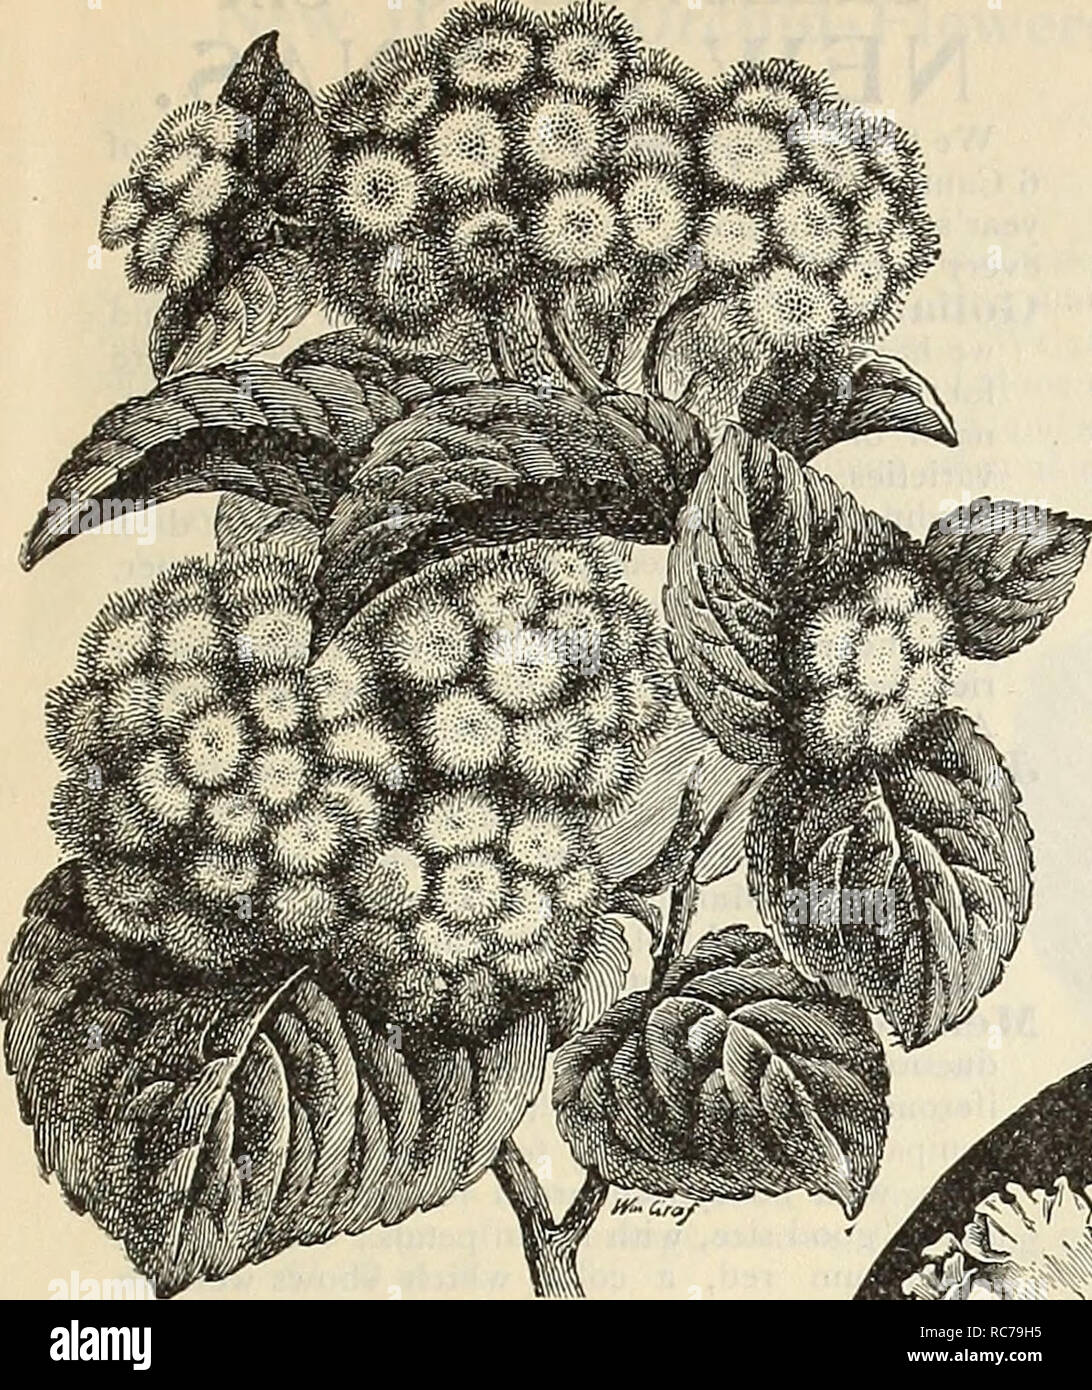 . Dreer's garden calendar : 1898. Seeds Catalogs; Nursery stock Catalogs; Gardening Catalogs; Flowers Seeds Catalogs; Vegetables Seeds Catalogs. NOiL^LND Rere Plants â¢ â¦ â .. Ageratum Princess Pauline ]Vew Frilled Tuberous-rooted Begonia. A most unique form, with very large single flowers which are en- tirely distinct from anything hereto- fore offered, the petals being wavy and beautifully frilled on the edges similar to the newer forms of Pe- tunias. The illustration gives a very good idea of its general appearance. Of German origin, and created a sensation wherever exhibited the past seas Stock Photo